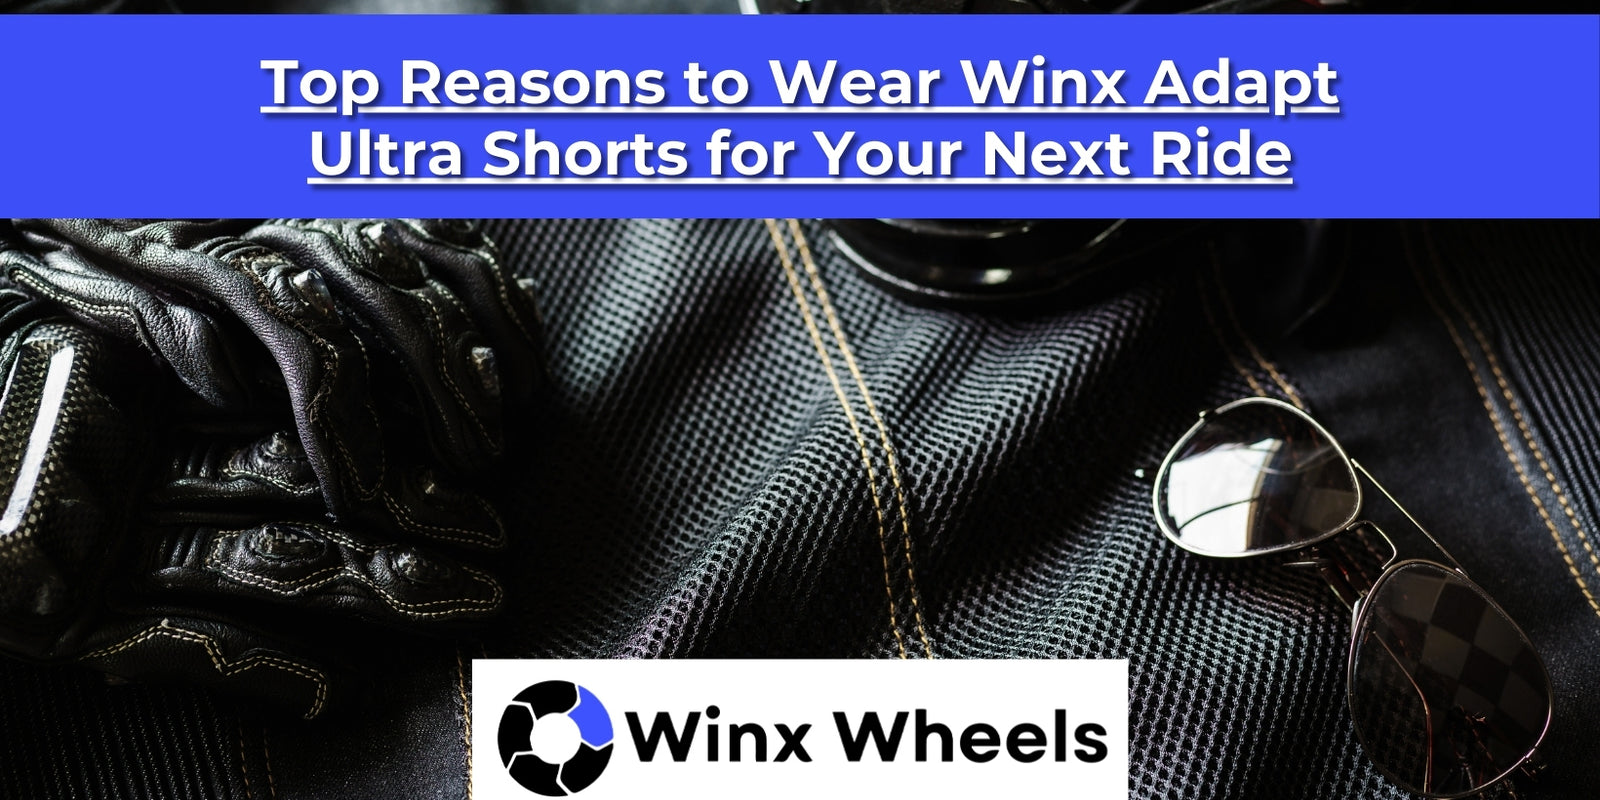 Top Reasons to Wear Winx Adapt Ultra Shorts for Your Next Ride